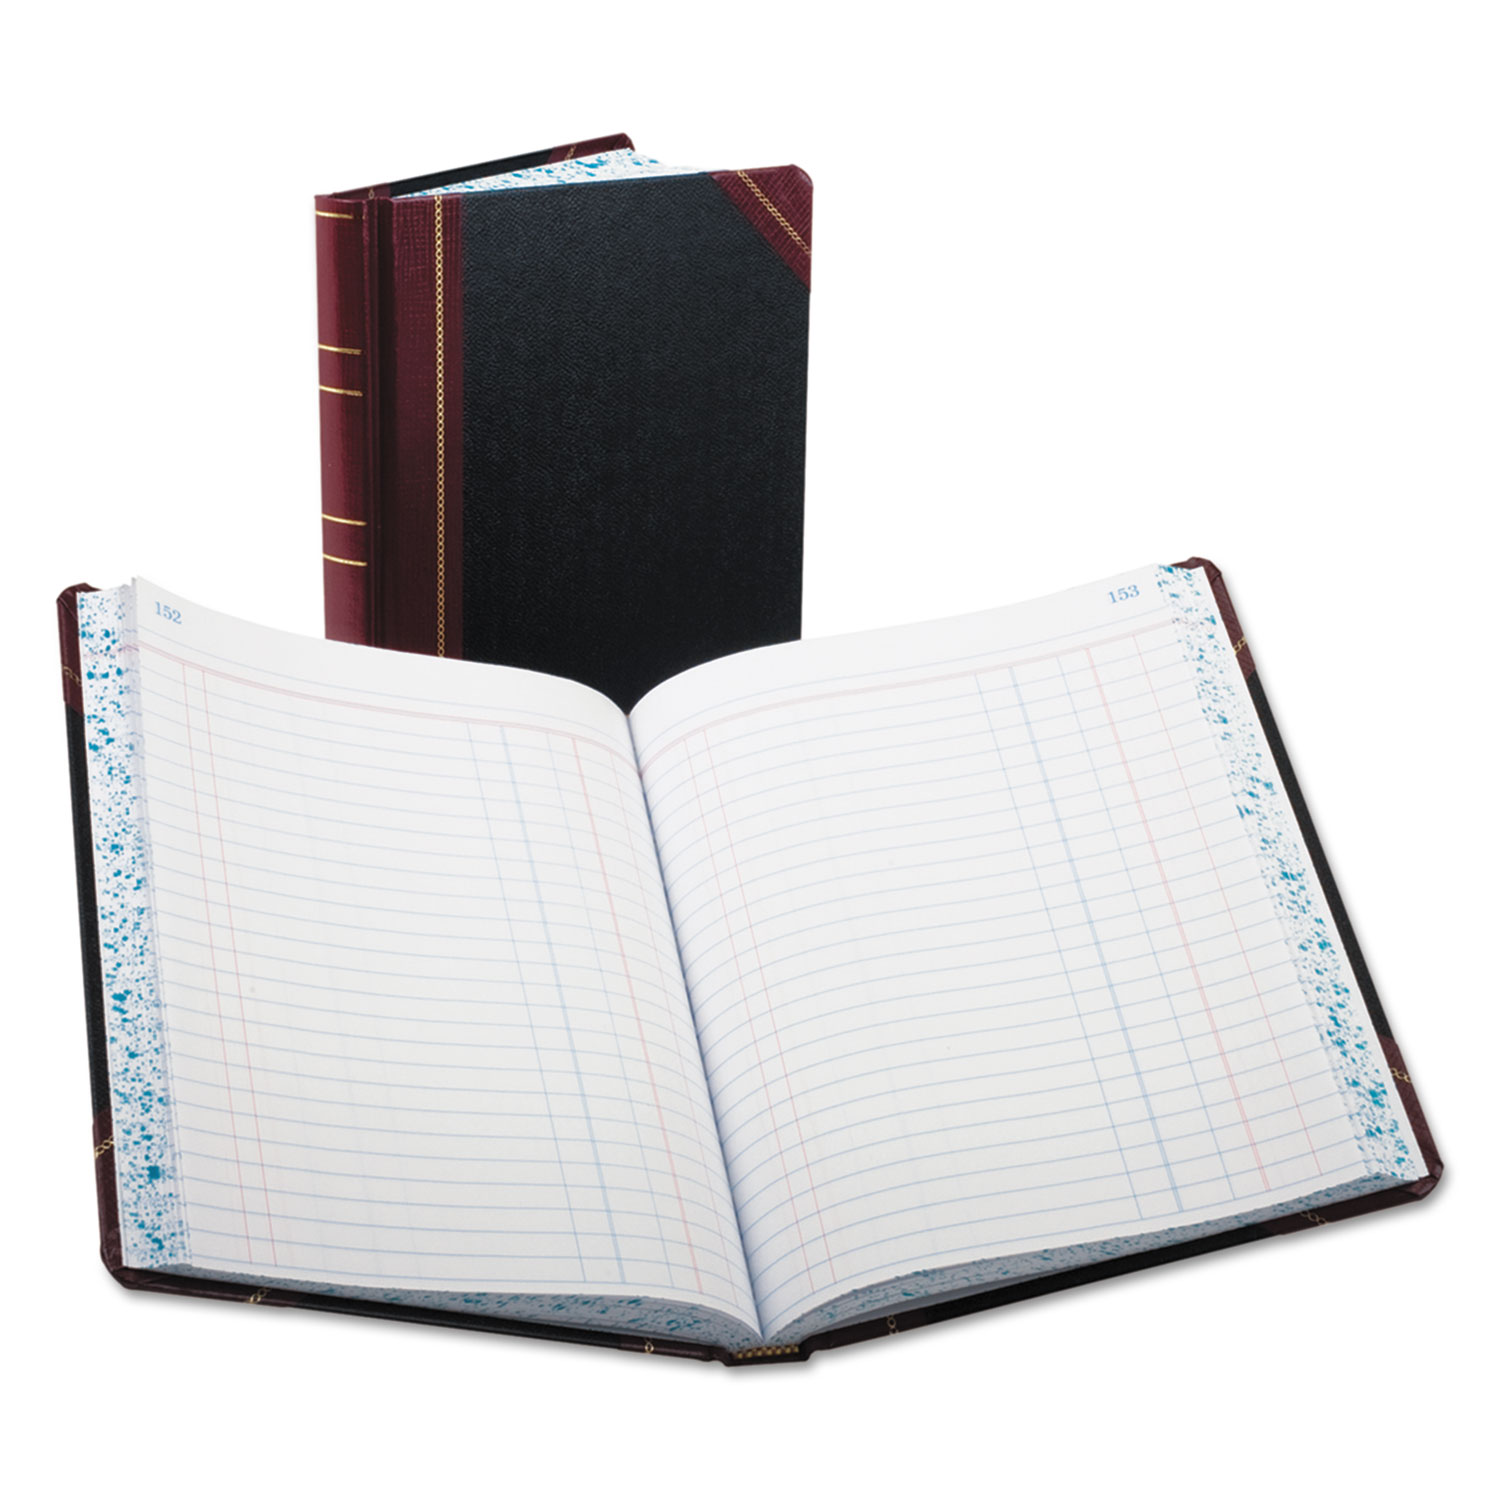  Boorum & Pease 38-300-J Record/Account Book, Journal Rule, Black/Red, 300 Pages, 9 5/8 x 7 5/8 (BOR38300J) 